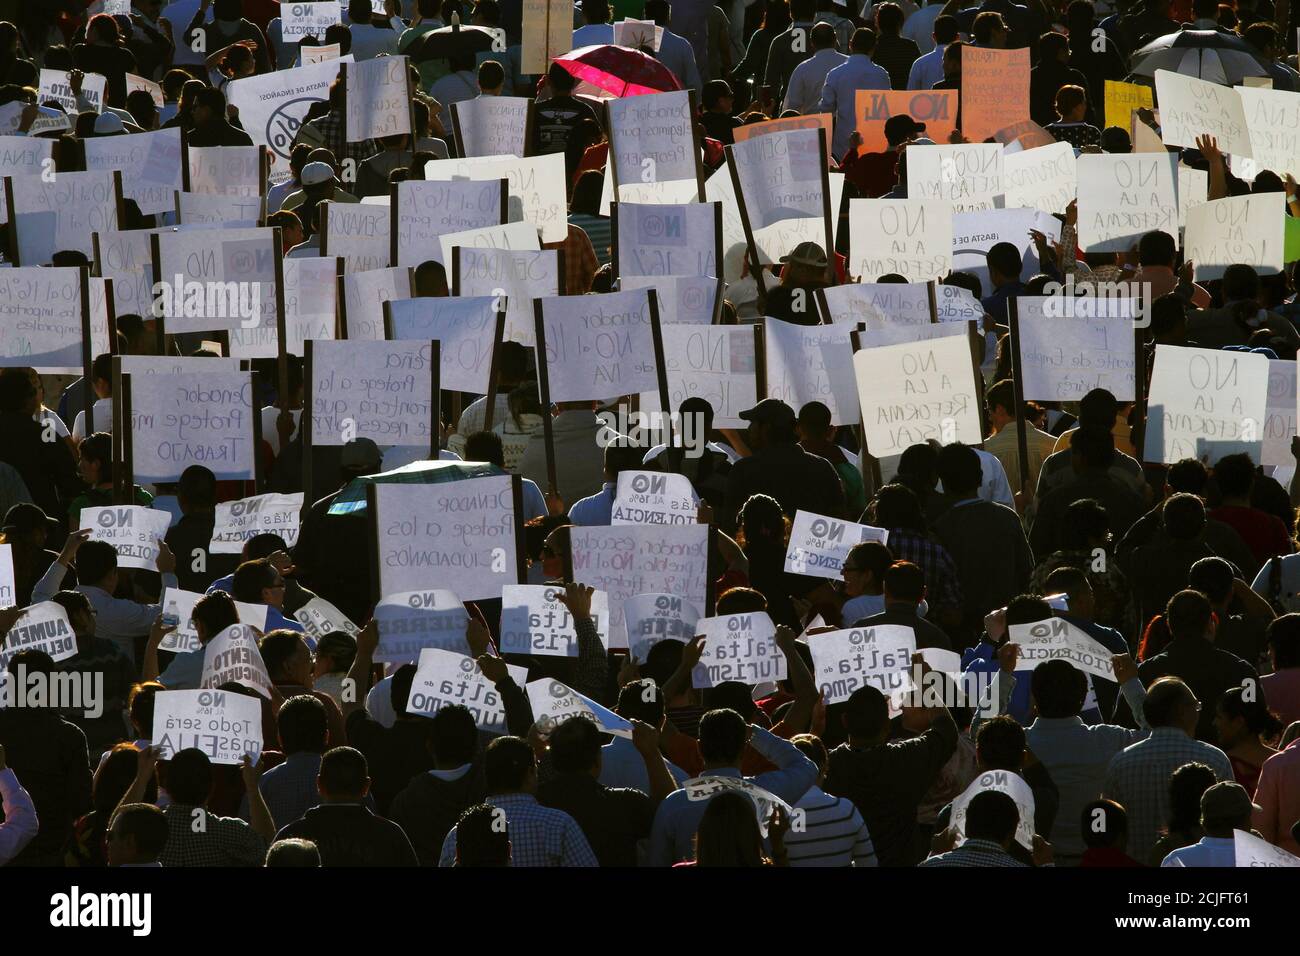 Demonstrators hold up signs during a march against the federal government's economic and tax reforms in Ciudad Juarez October 22, 2013. The Lower House maintained the government's plan to raise the lower 11 percent value-added tax (VAT) rate for border states to match the national rate of 16 percent.  REUTERS/Jose Luis Gonzalez (MEXICO  - Tags: BUSINESS SOCIETY POLITICS CIVIL UNREST) Stock Photo